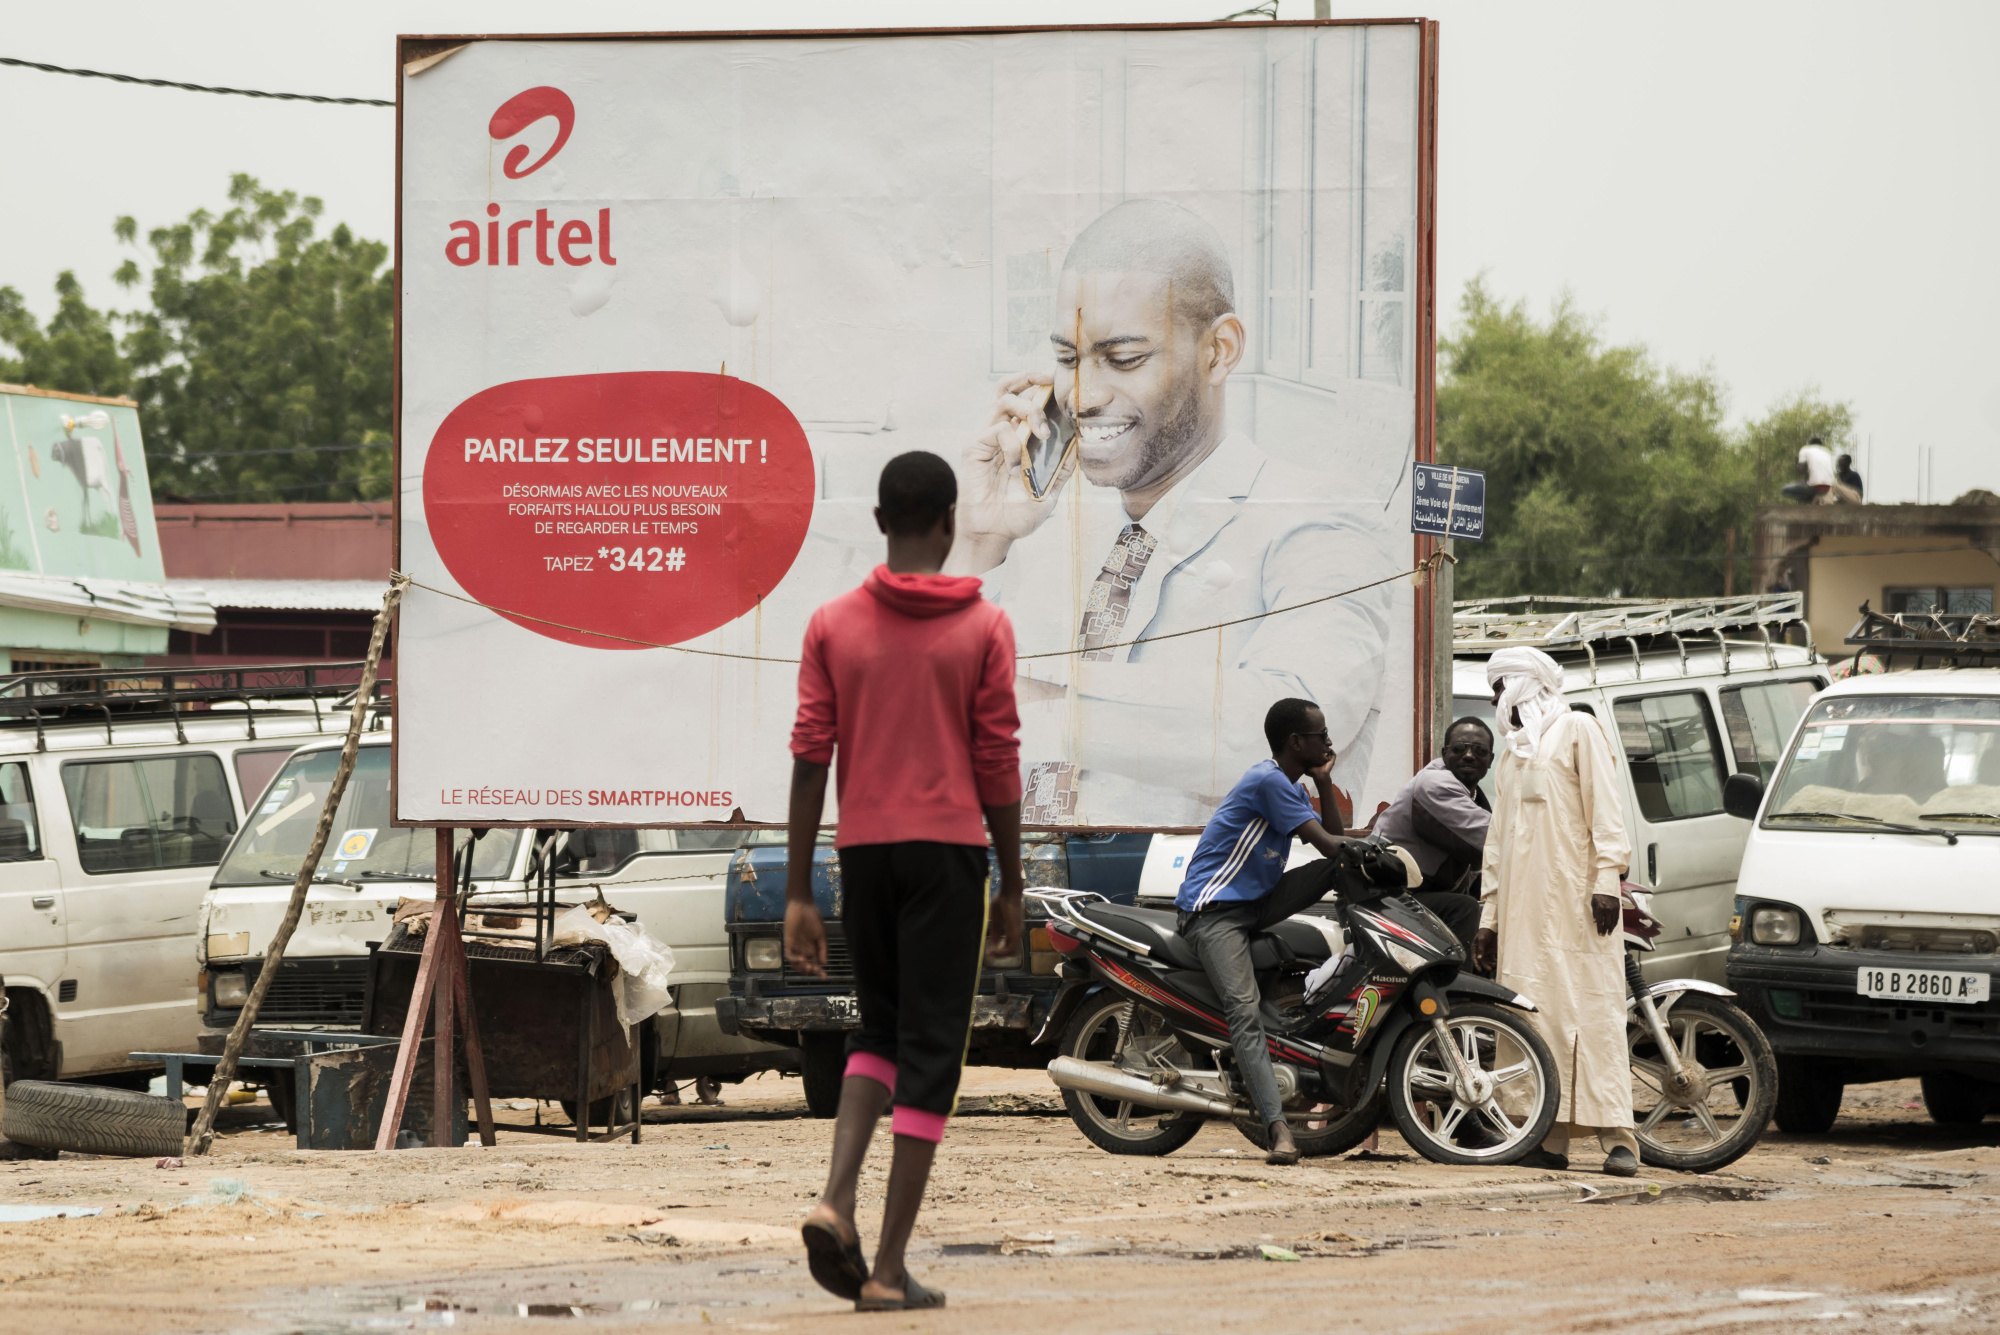 Truecaller Phone App Maker in Talks With Airtel About Africa